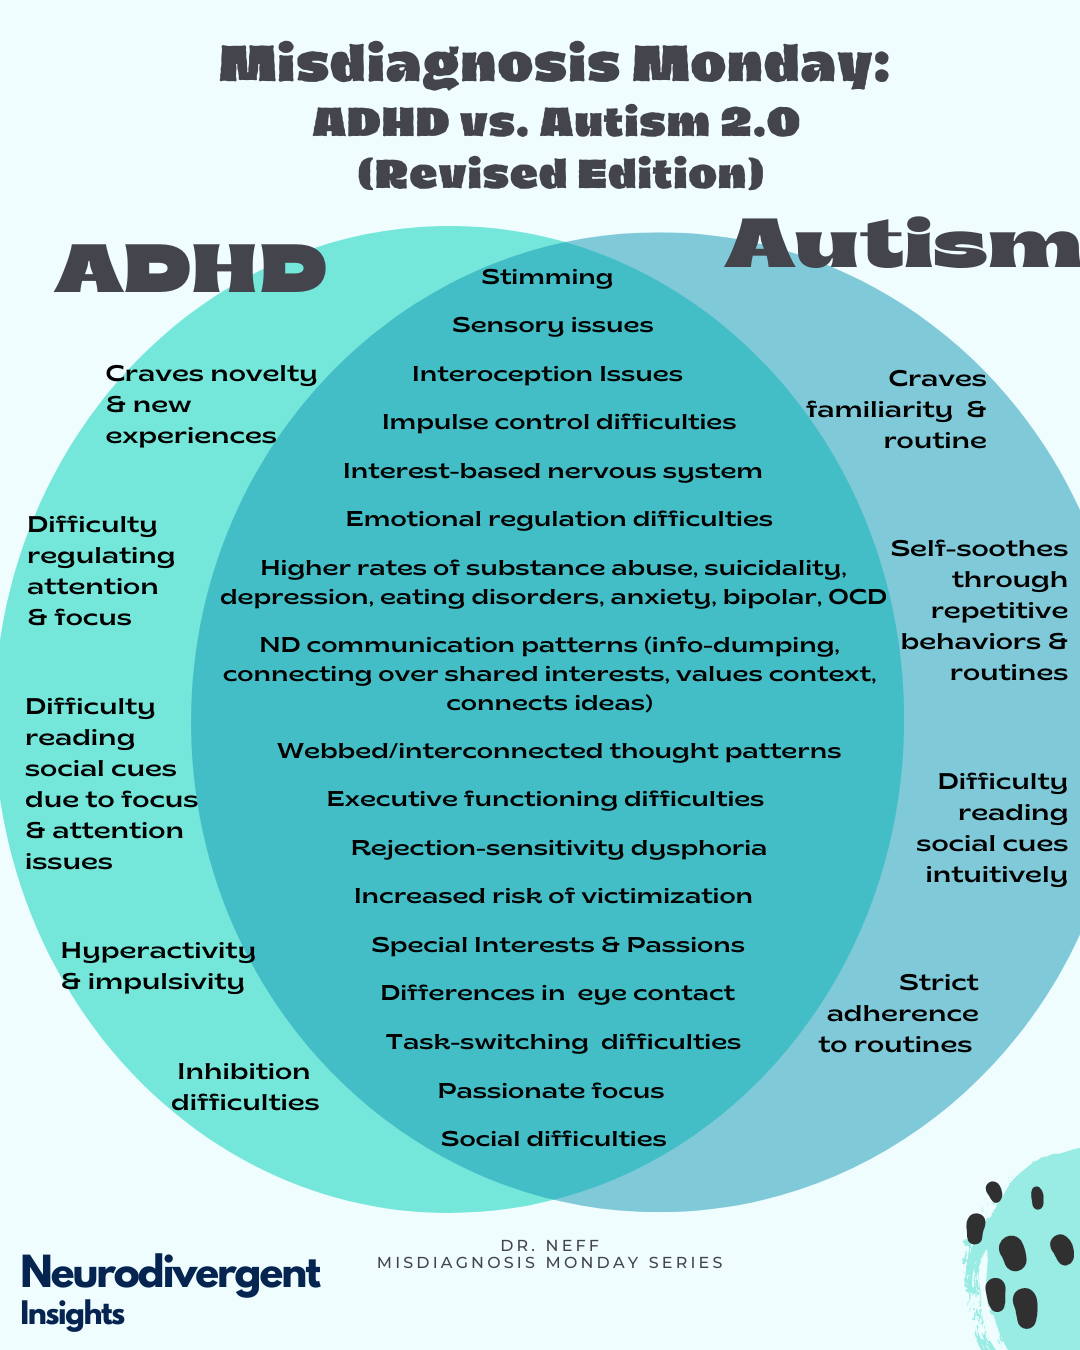 Can you be ADHD without being autistic?